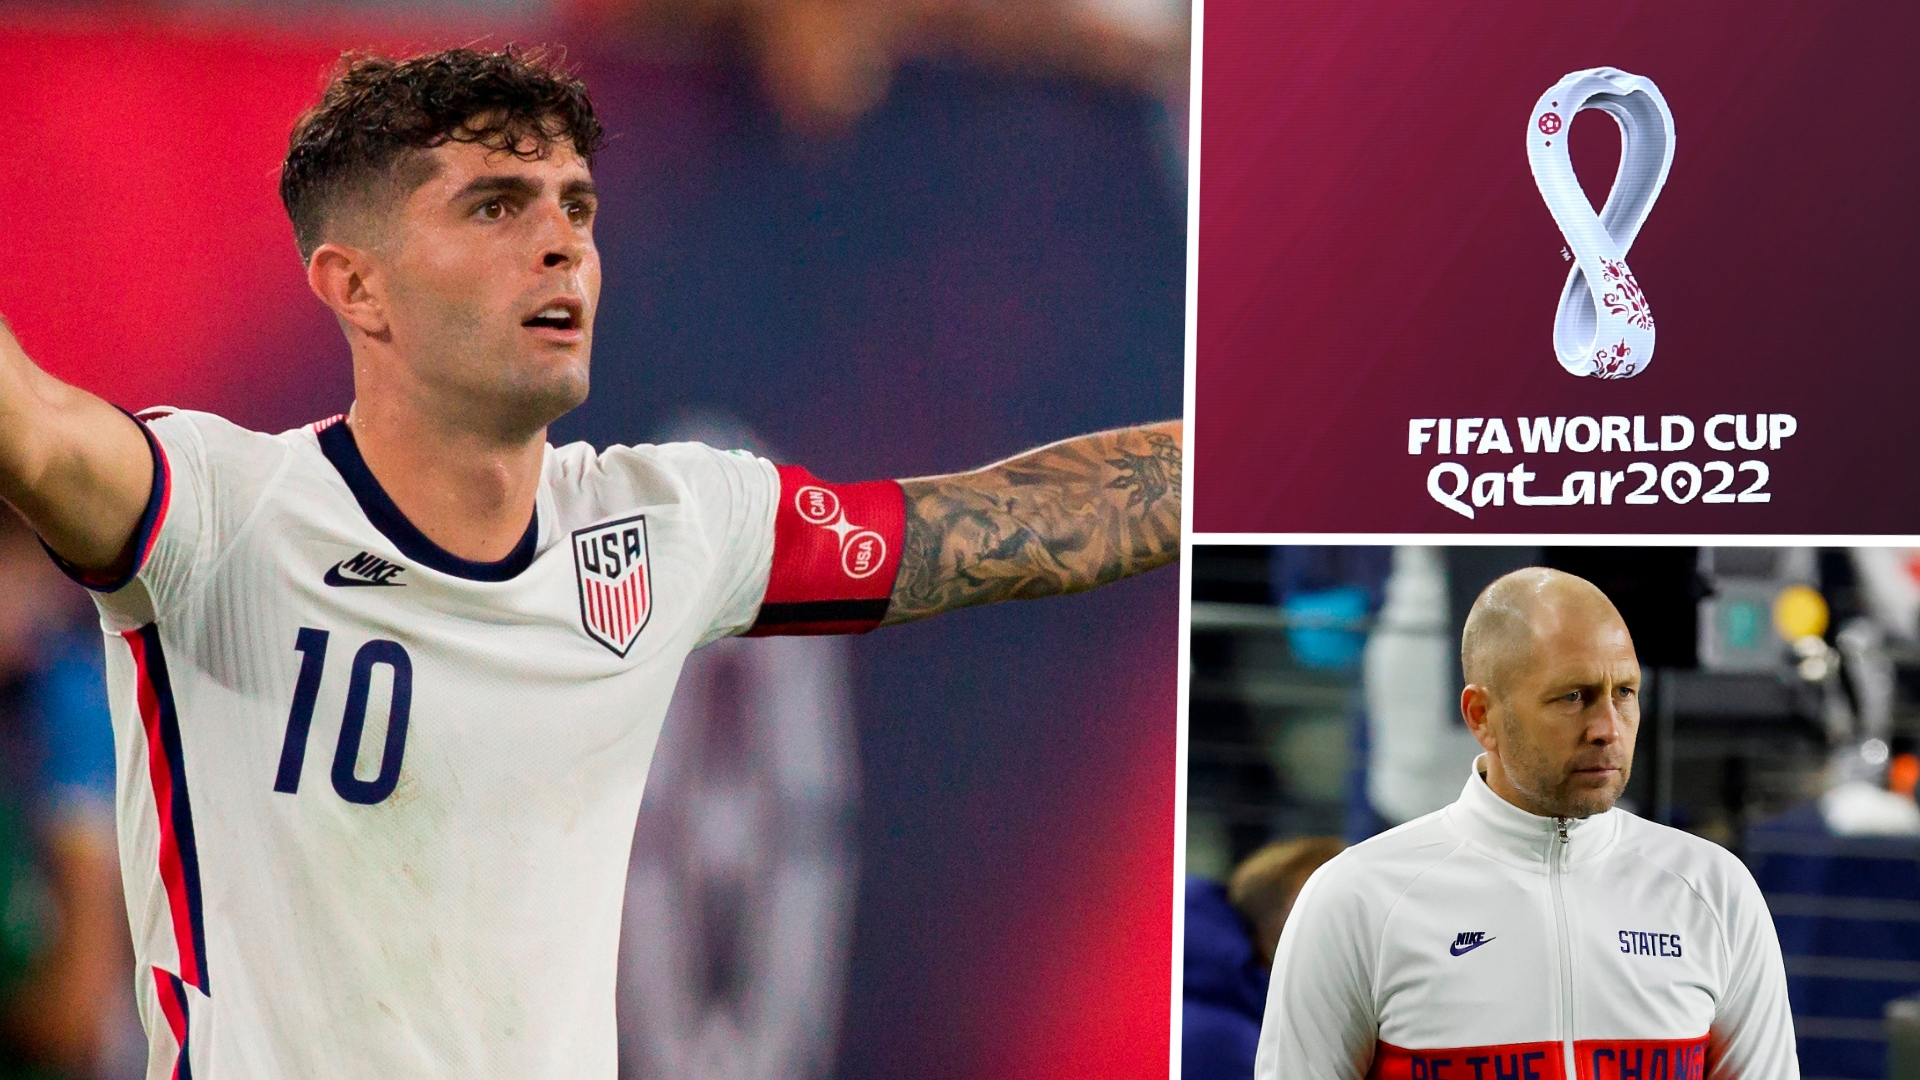 USMNT World Cup 2022 qualifying: Group, fixtures, results & everything you need to know